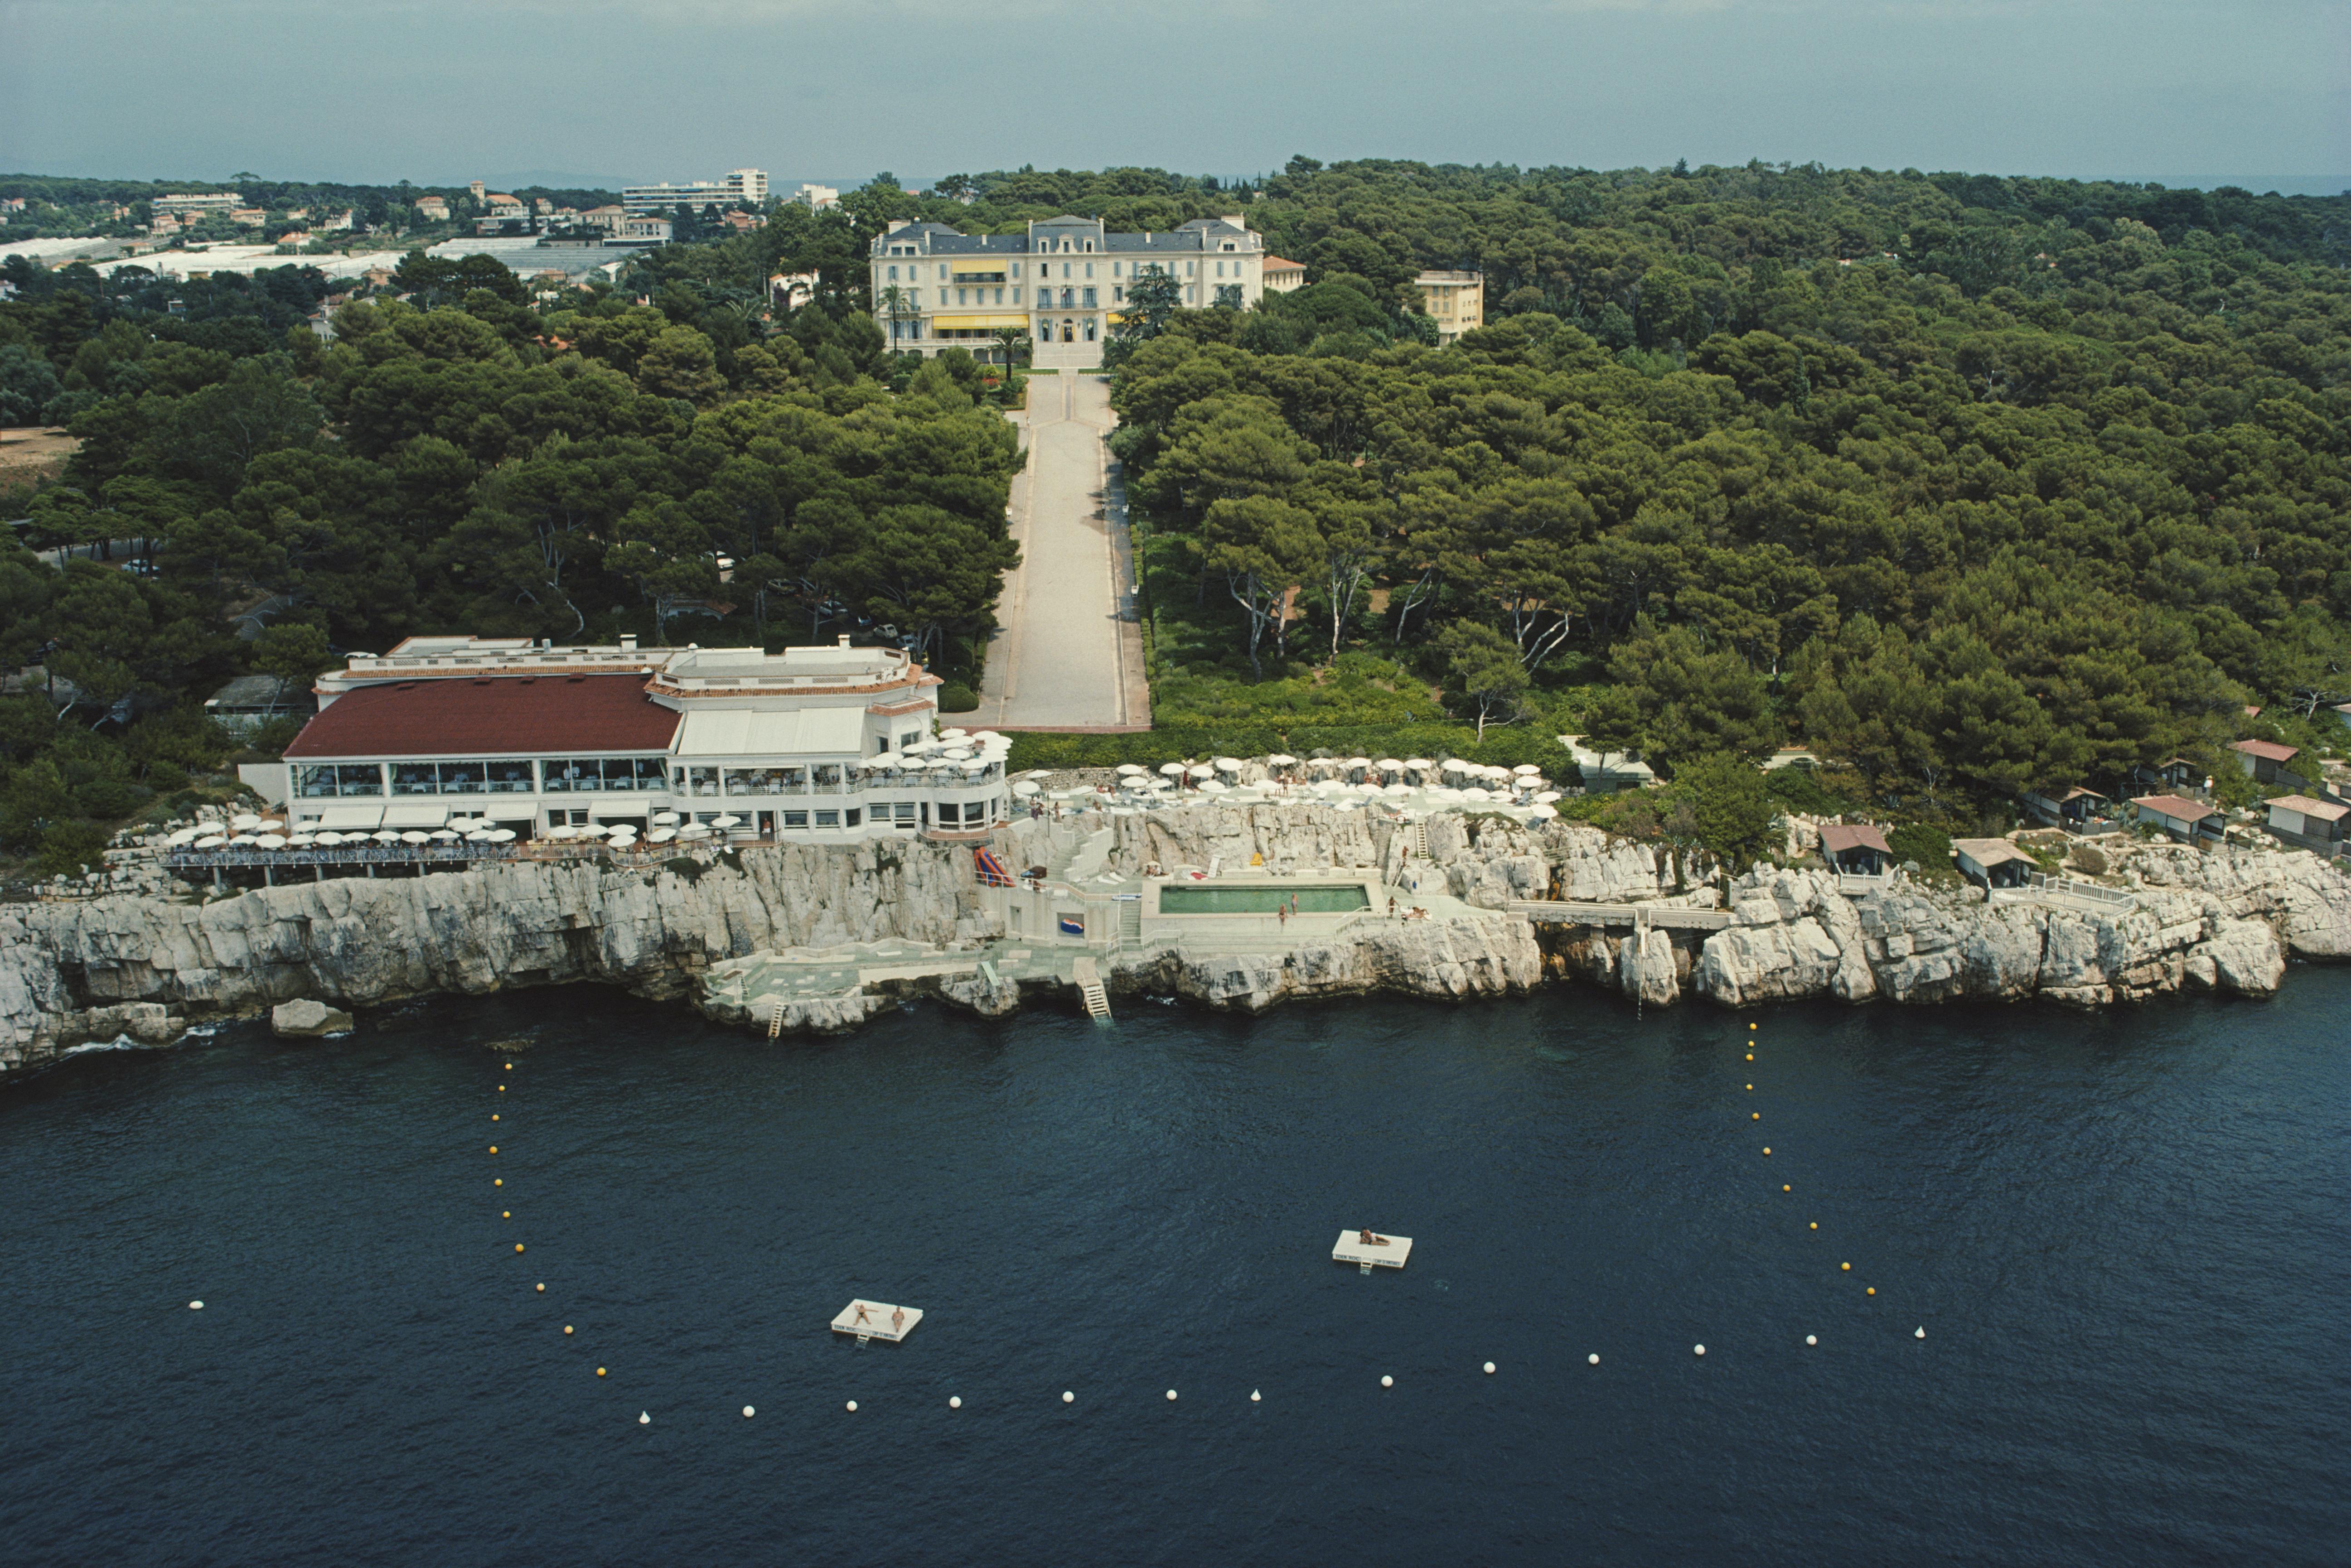 'Hotel Du Cap-Eden-Roc' 1976 Slim Aarons Limited Estate Edition Print 

An aerial view of the Hotel du Cap-Eden-Roc in Antibes on the French Riviera, August 1976.

Produced from the original transparency
Certificate of authenticity supplied 
Archive